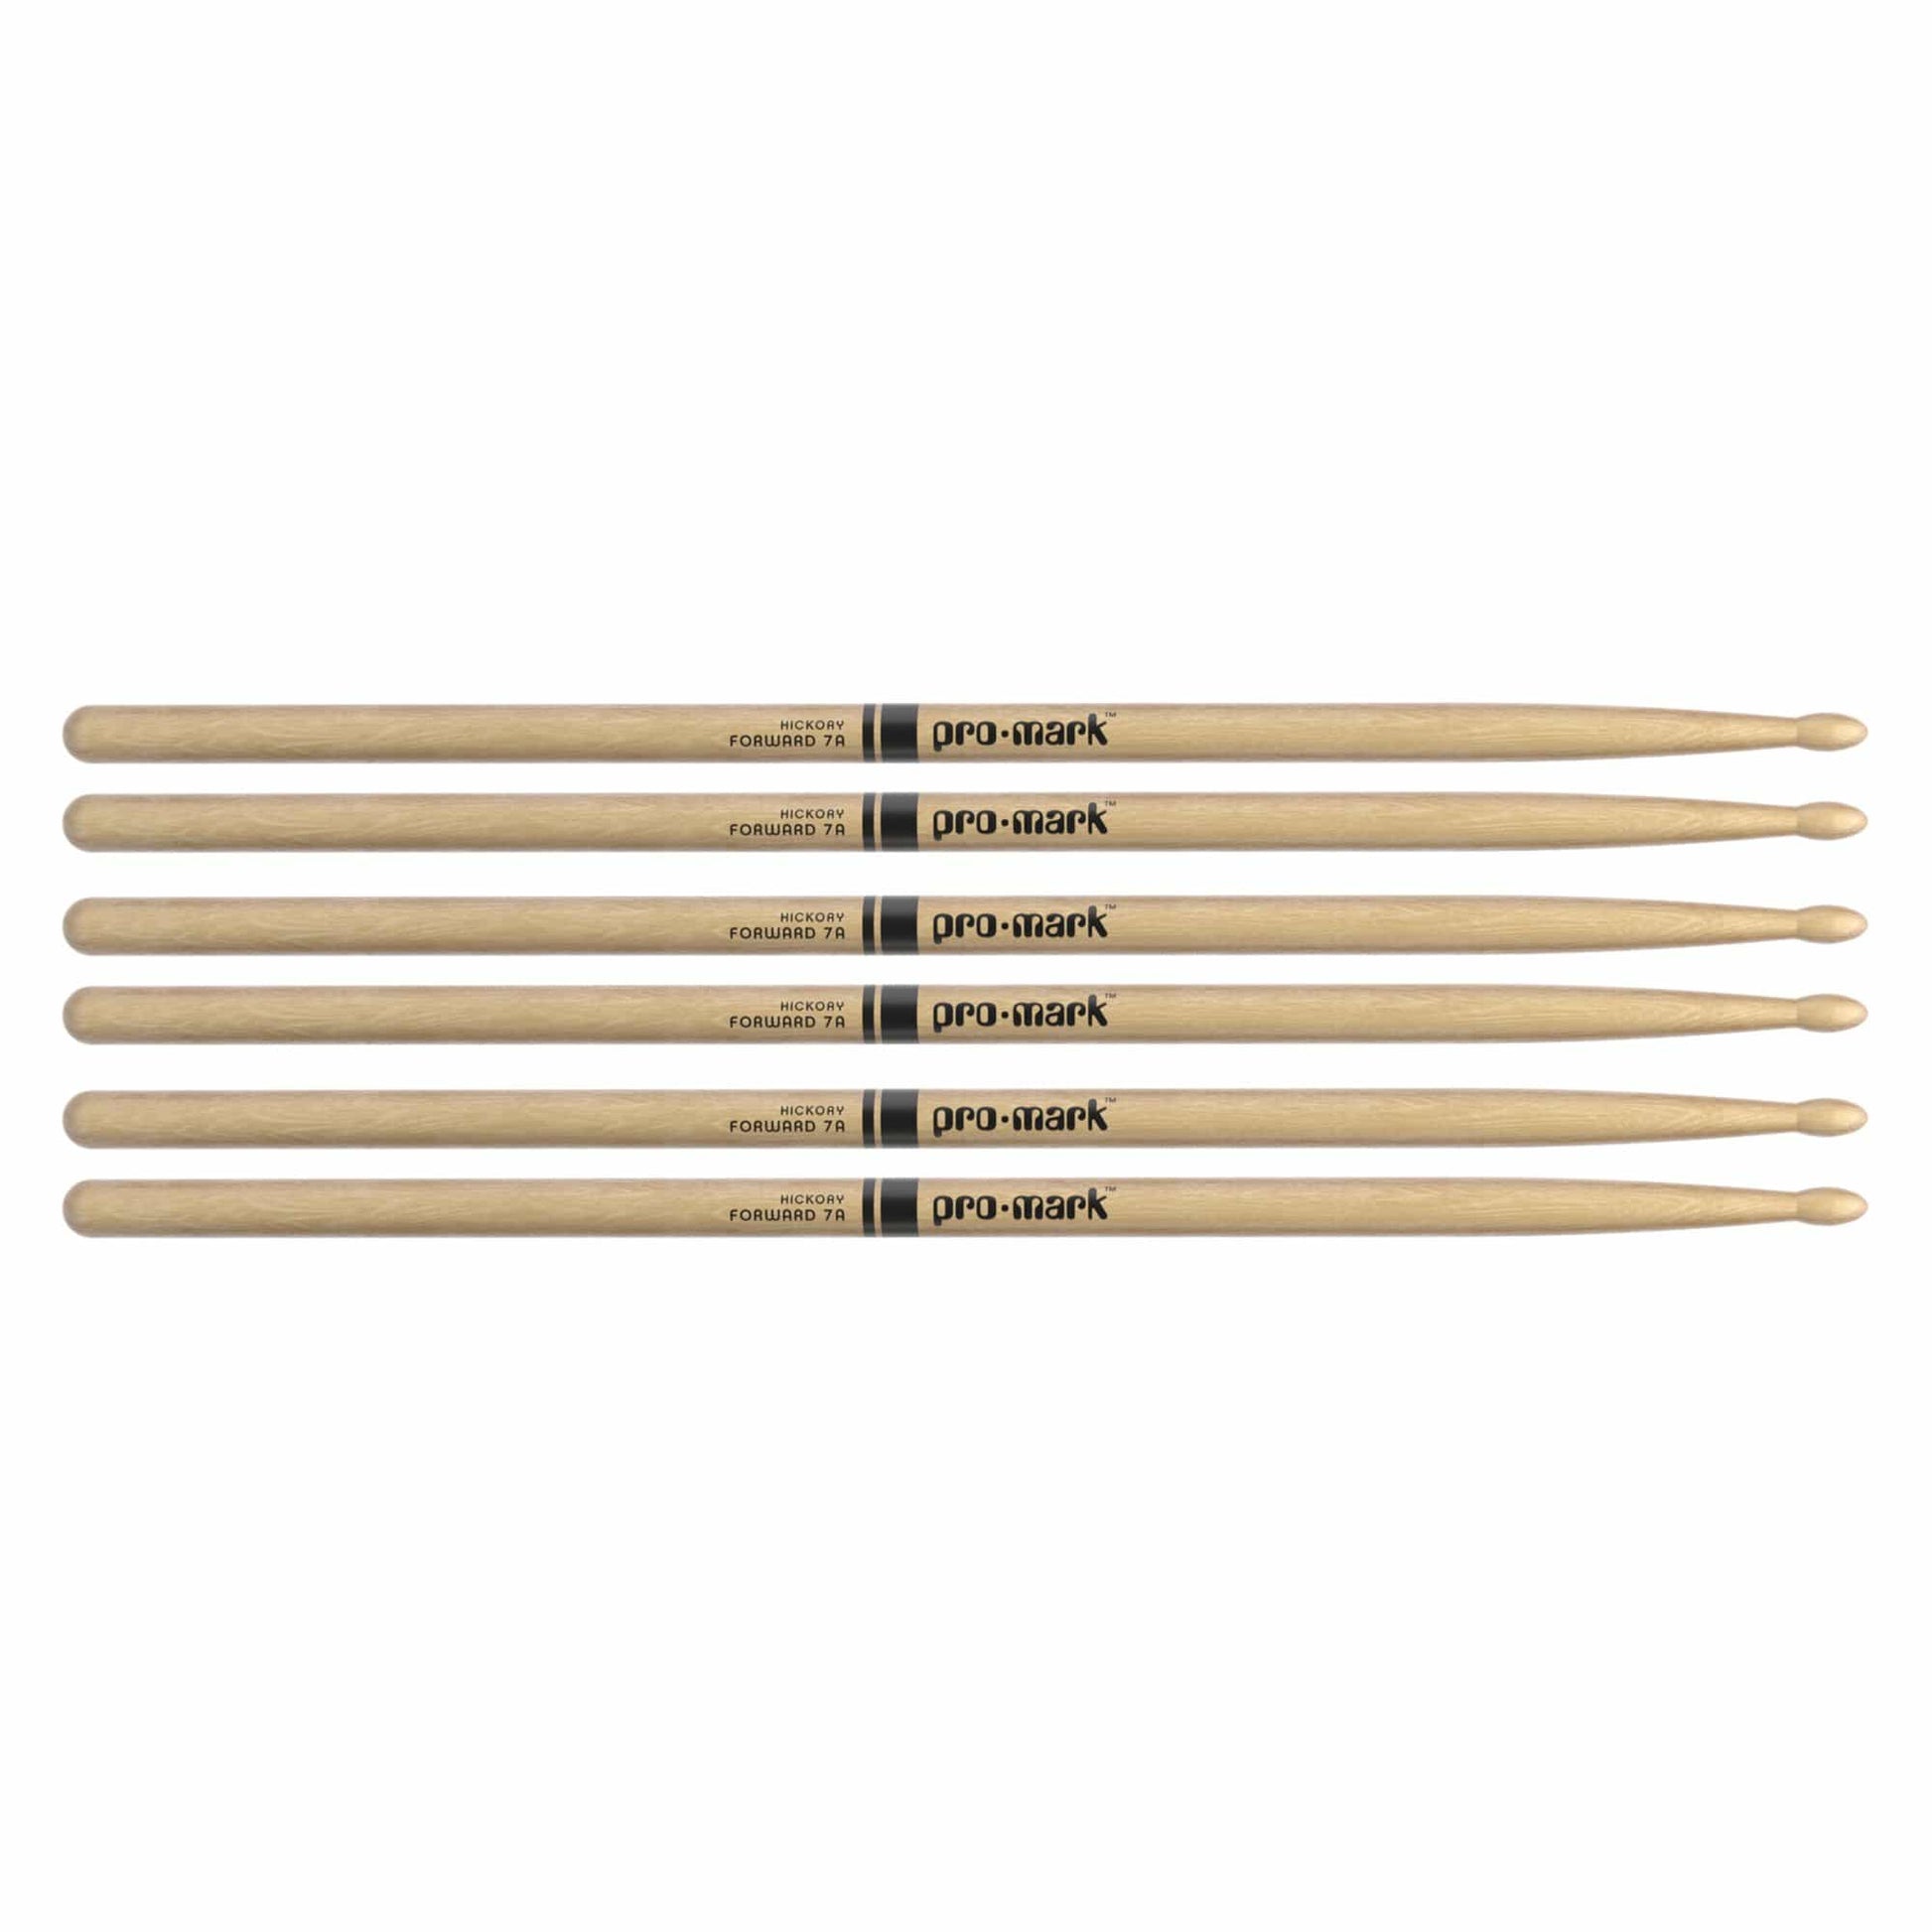 Promark American Hickory 7A Wood Tip Drum Sticks (3 Pair Bundle) Drums and Percussion / Parts and Accessories / Drum Sticks and Mallets